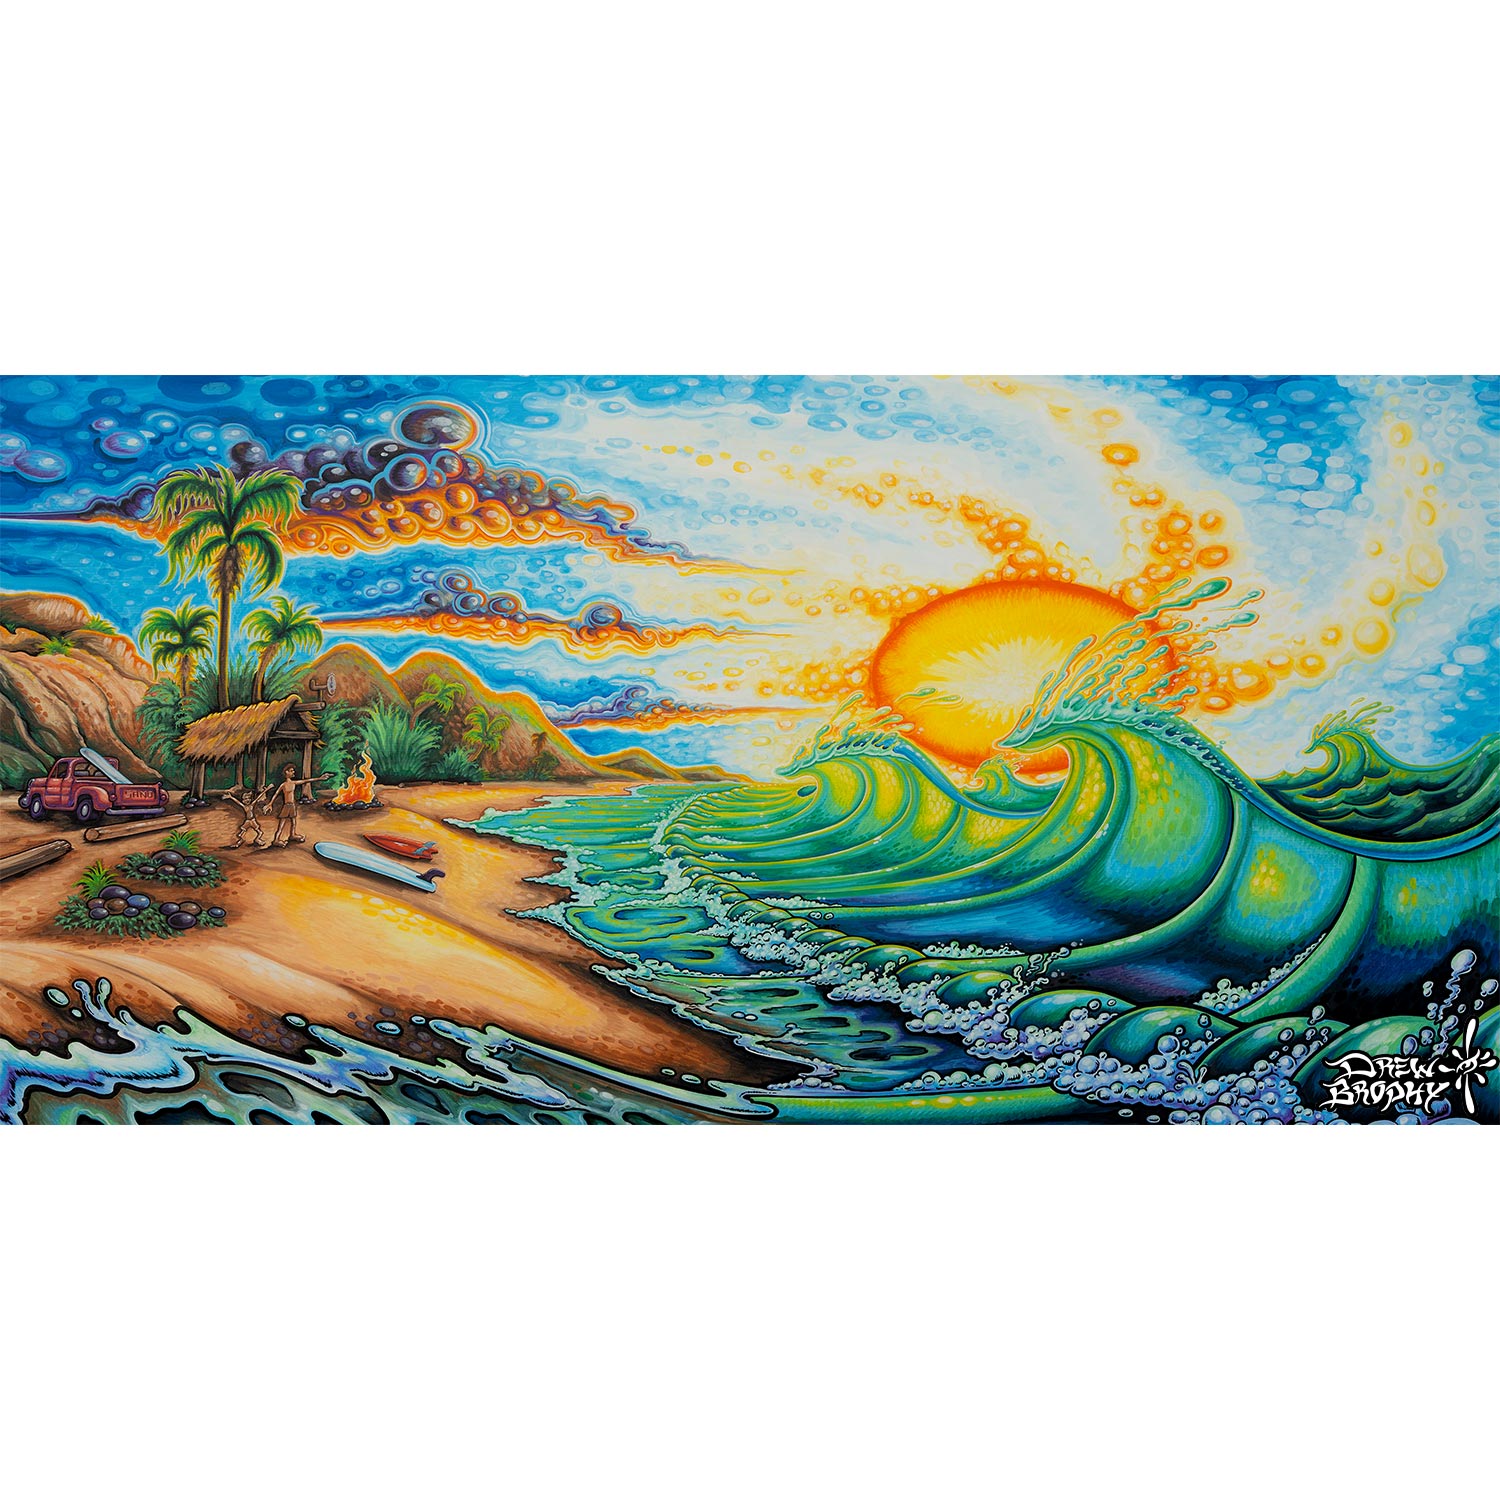 Sano Daze Signed & Numbered, Limited Edition Wall Surf Art Prints